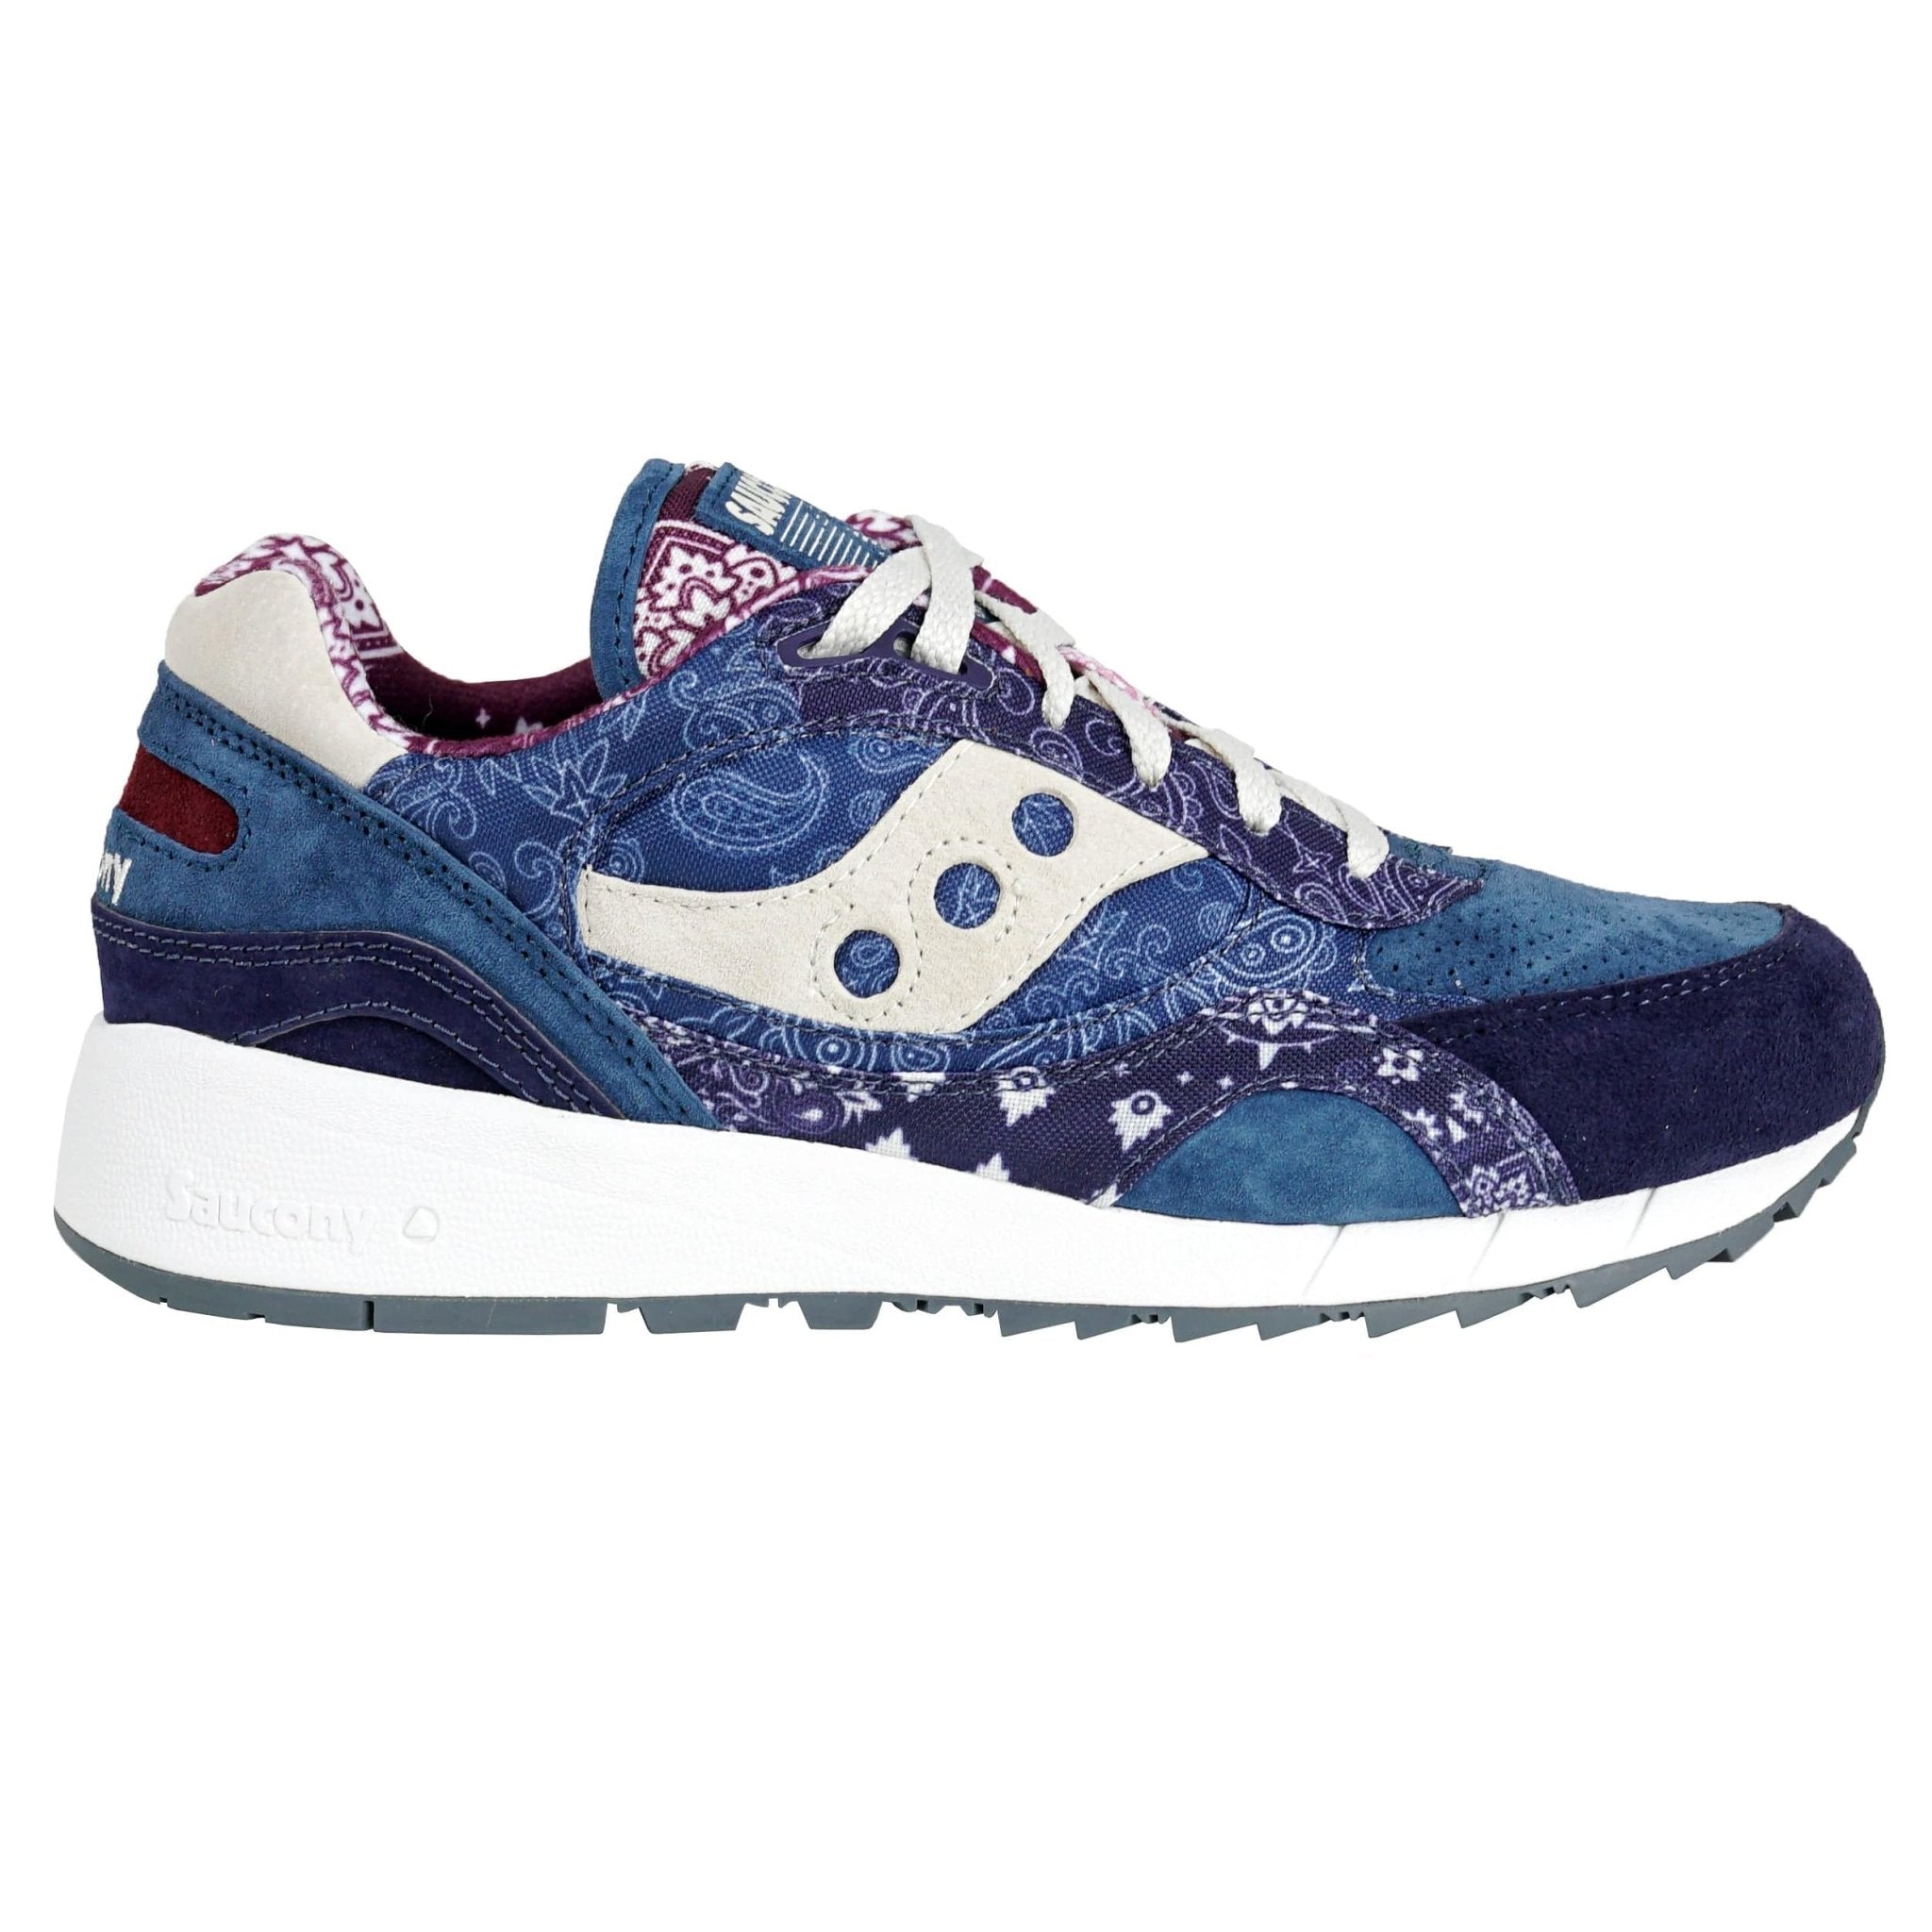 Shadow 6000 in paisley - Saucony - State Of Flux